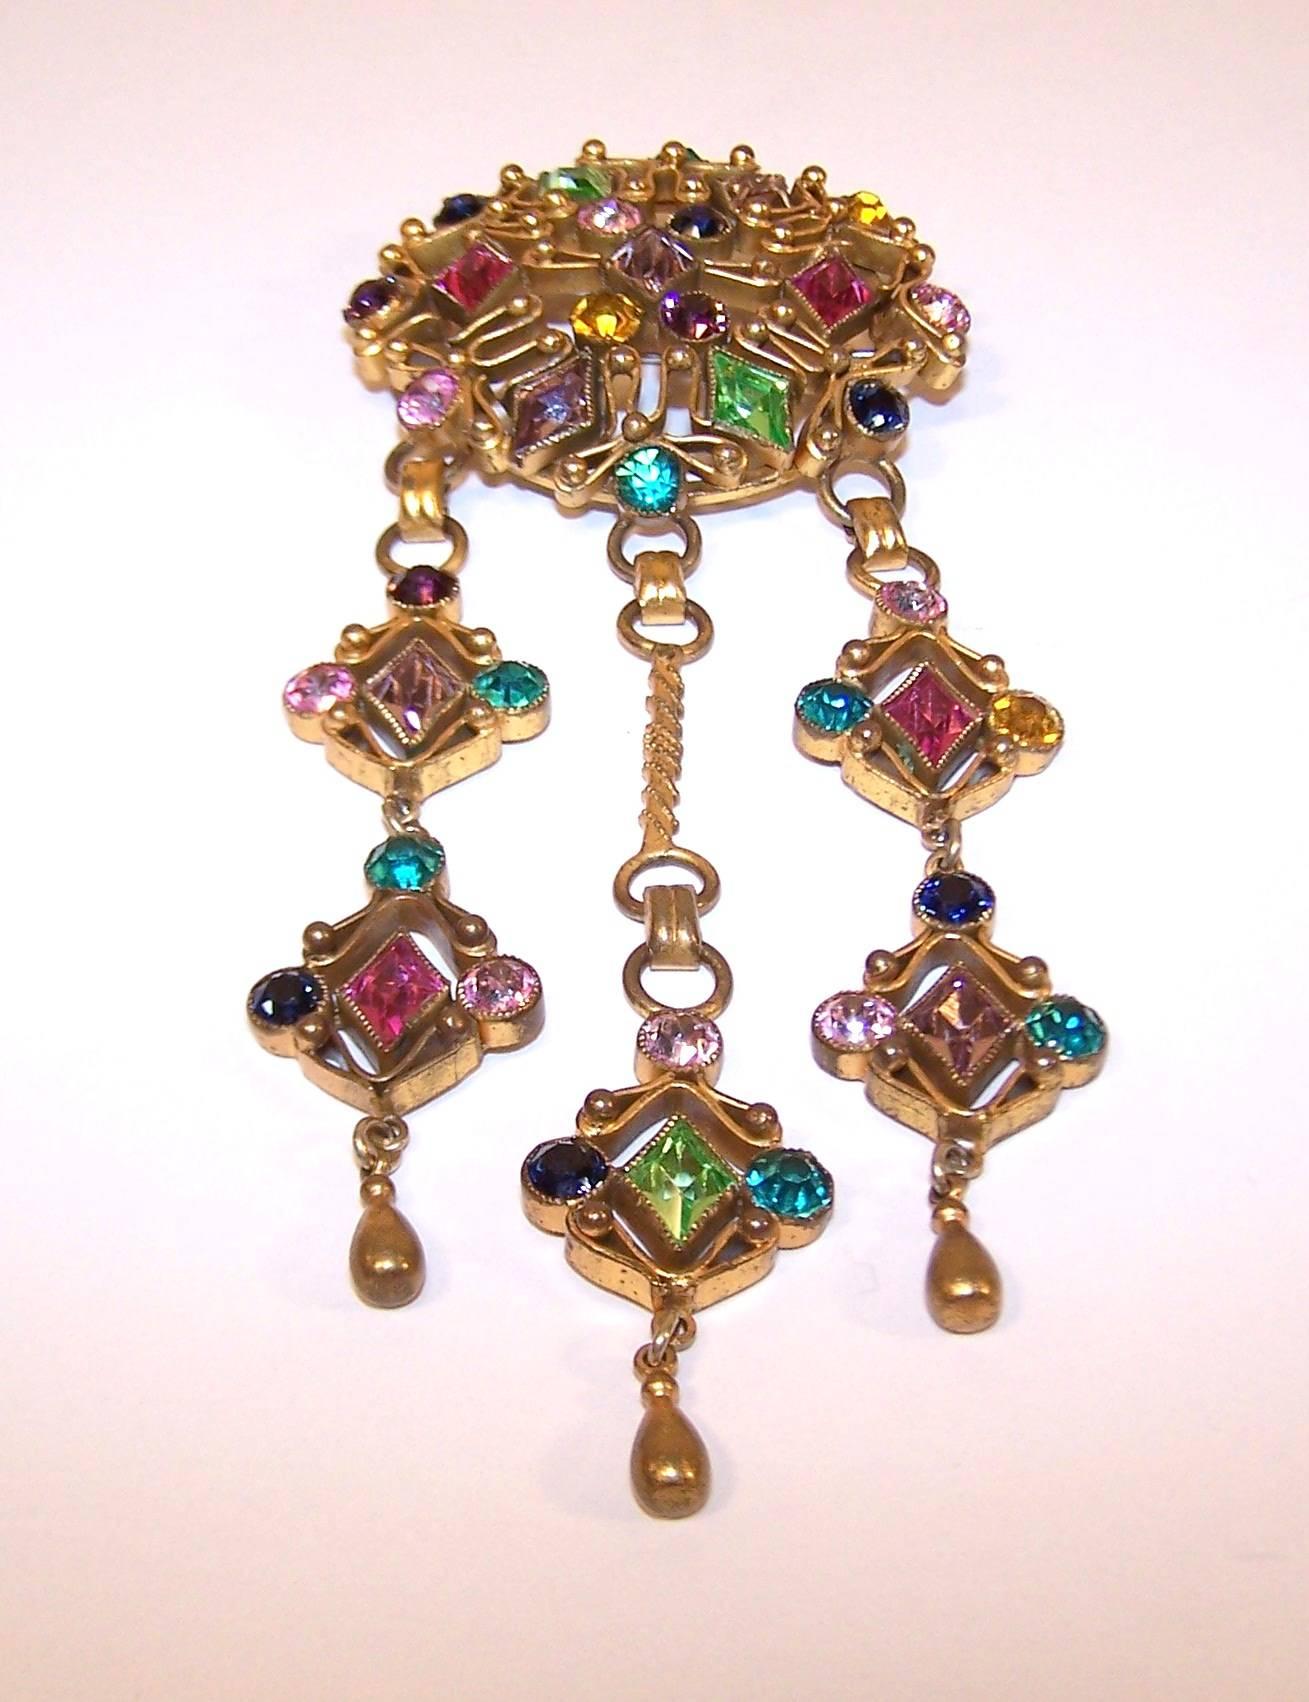 Women's Large C.1940 Ornate Crystal Rhinestone Brooch With Articulated Dangles